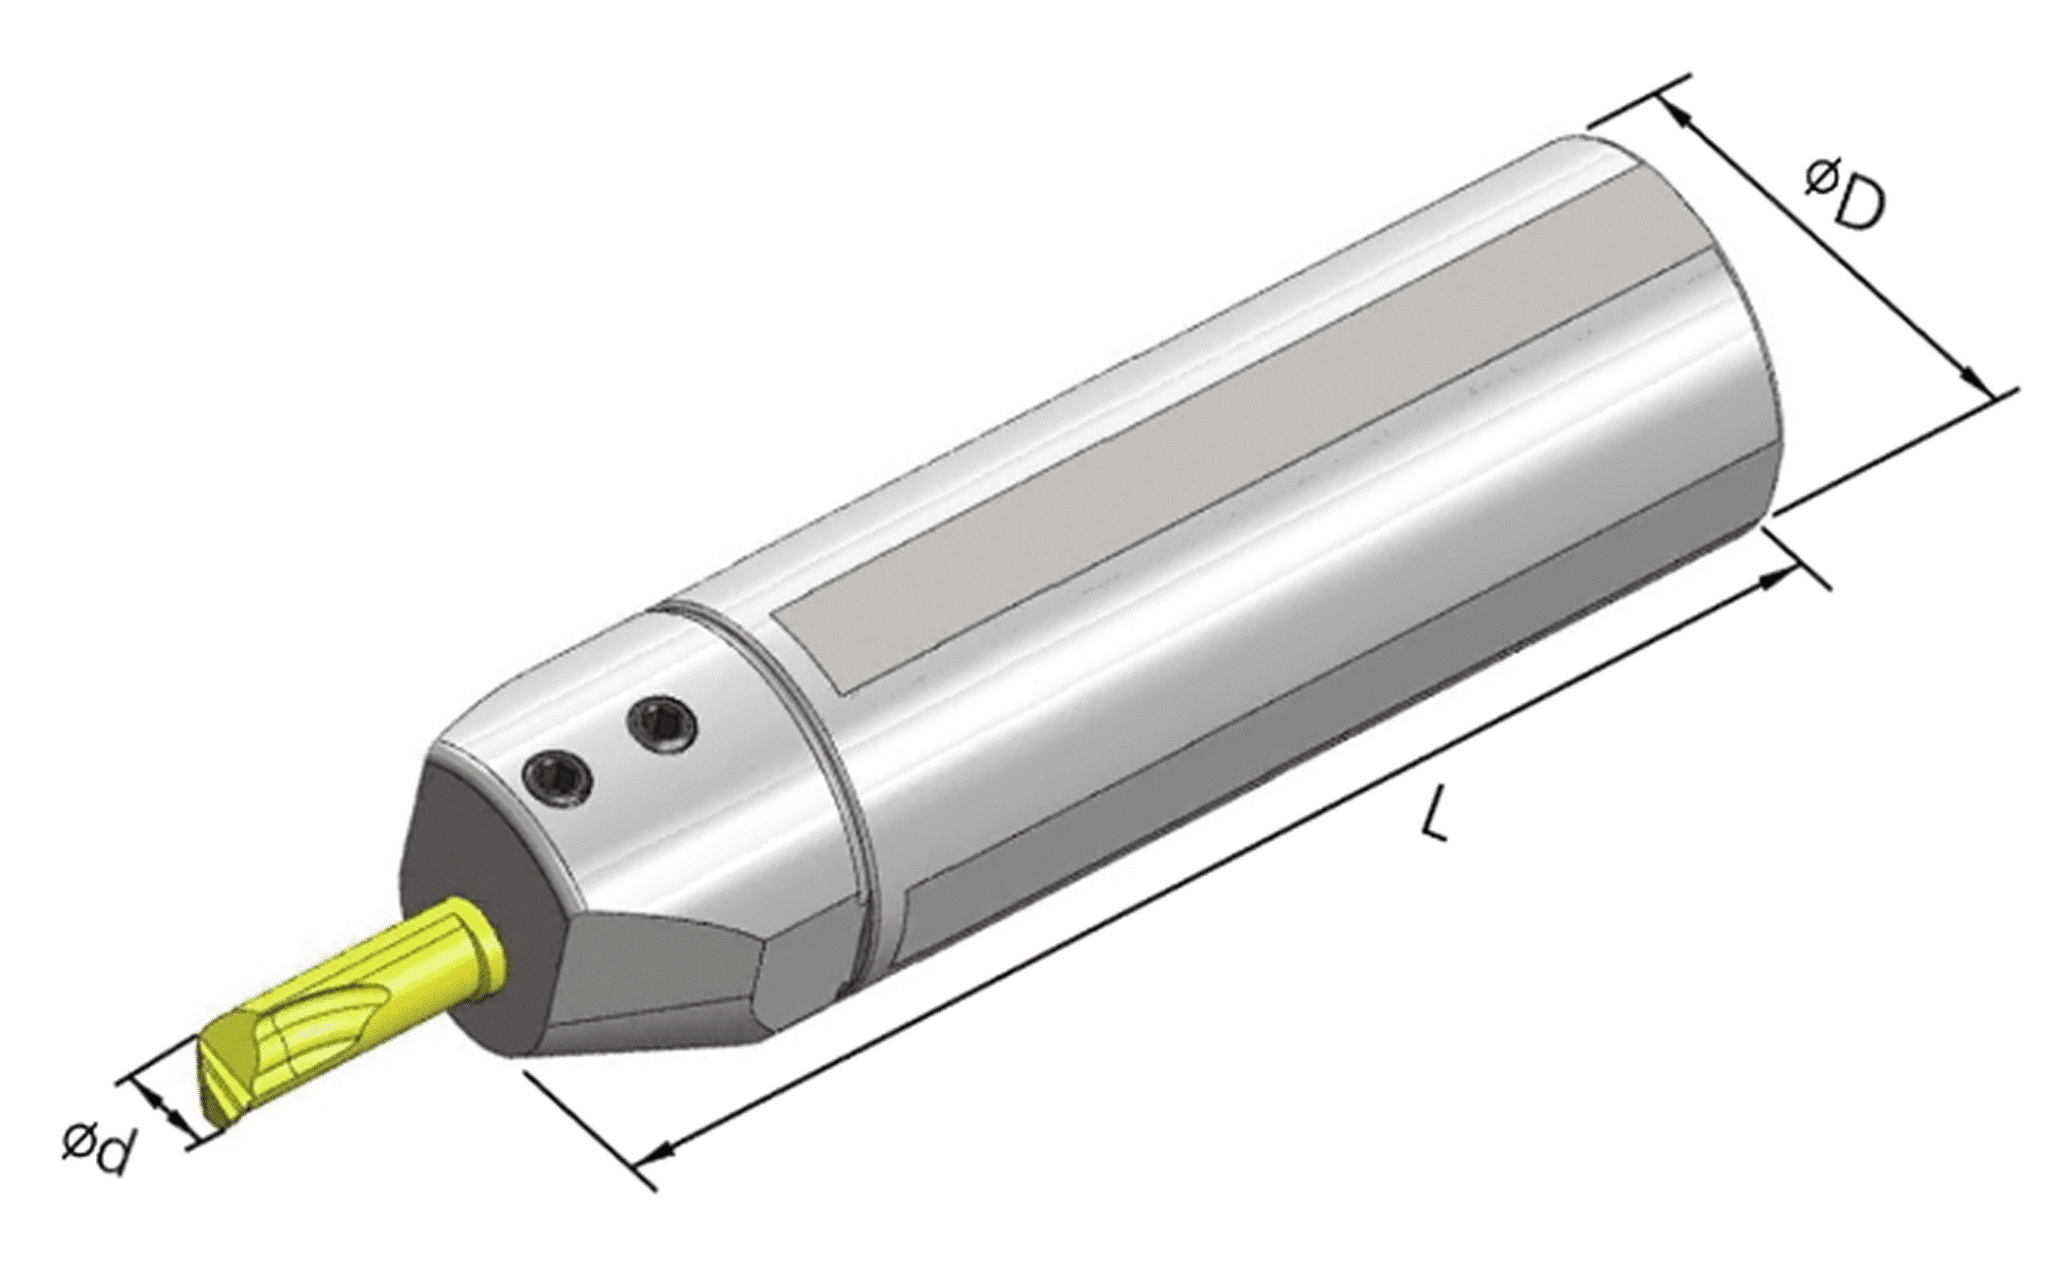 Direct Toolholder (D Type)